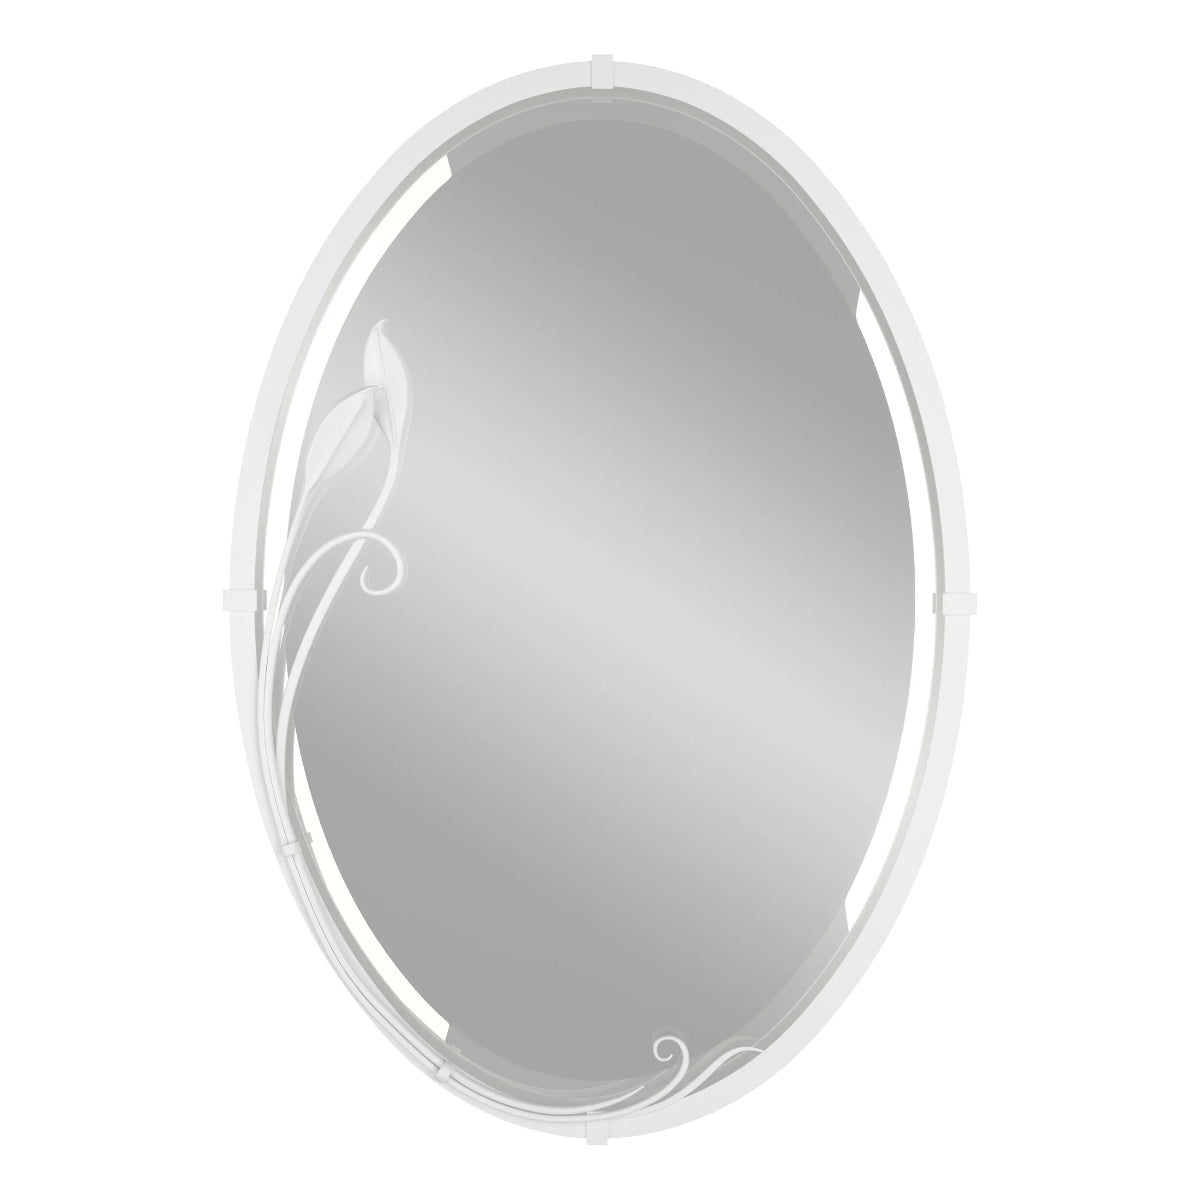 Beveled Oval 22 In. X 32 In. Wall Mirror with Leaf